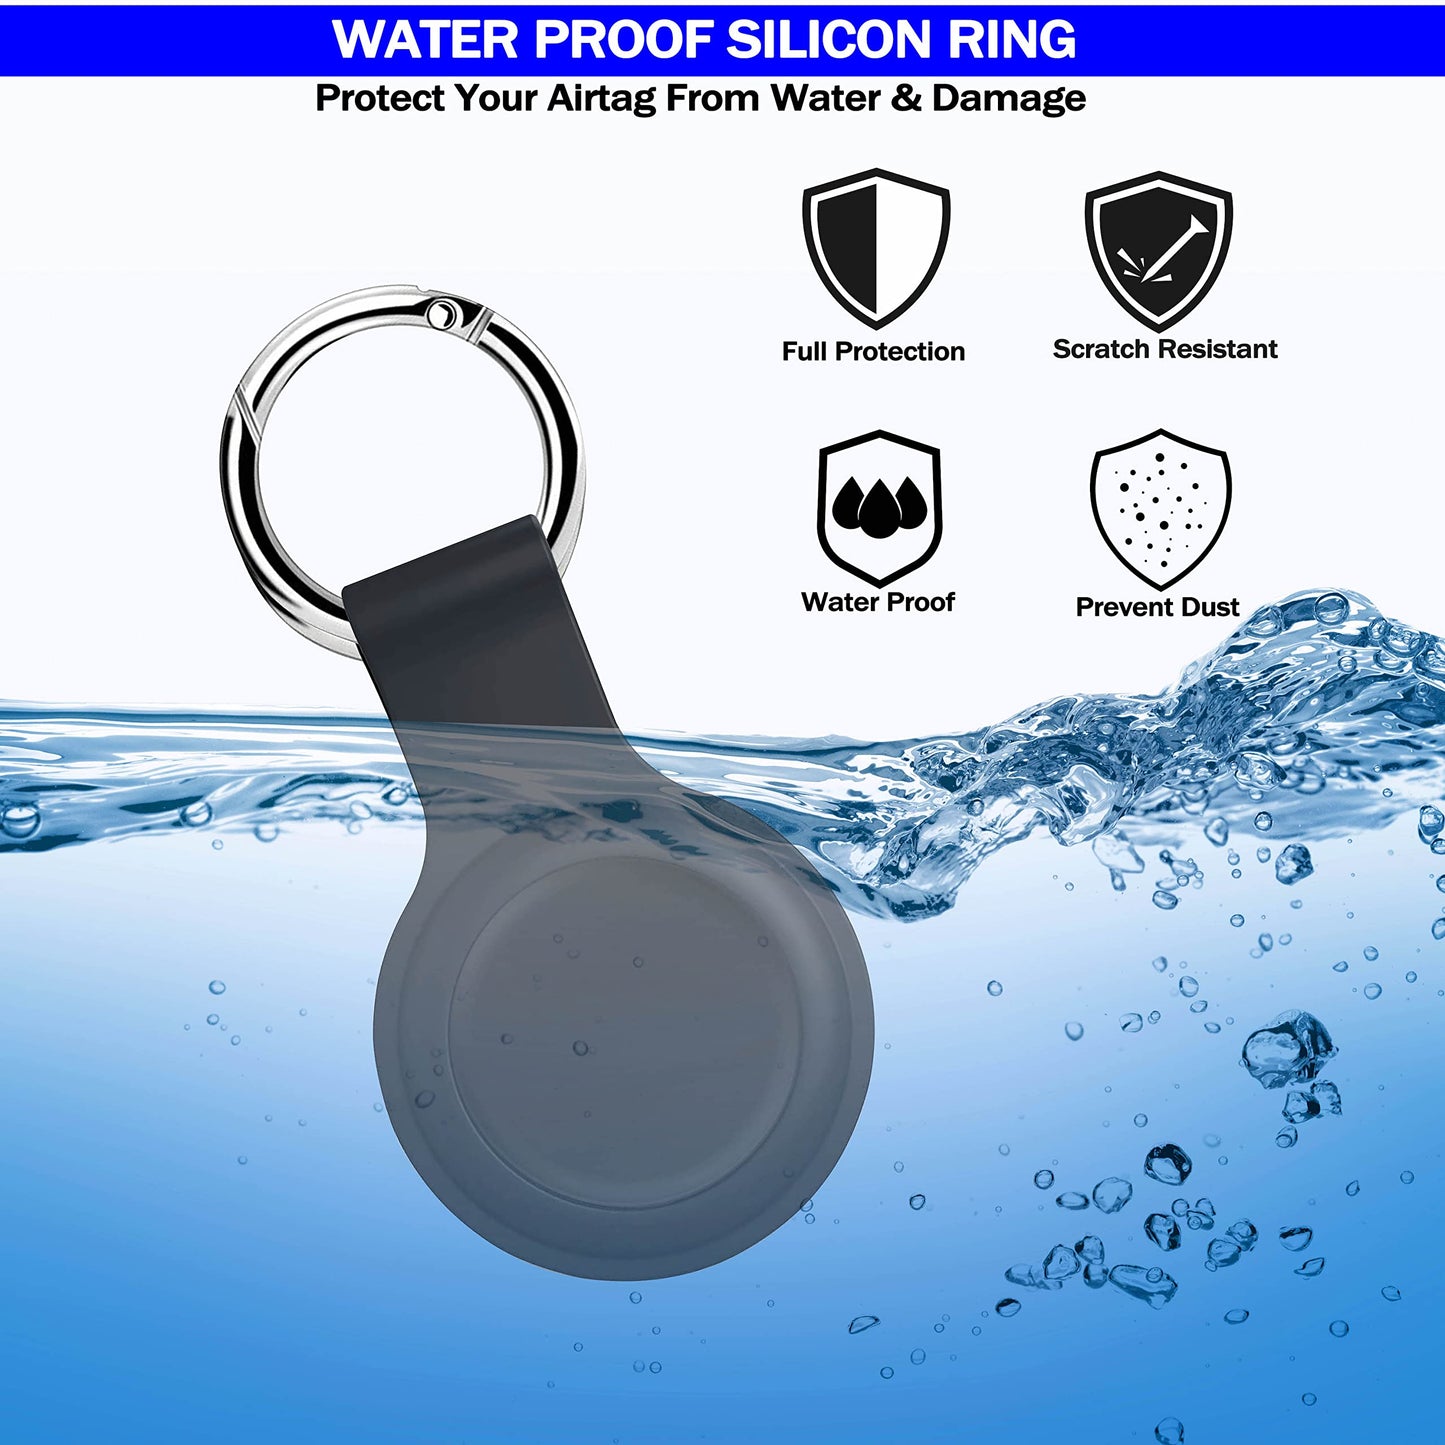 waterproof silicon ring